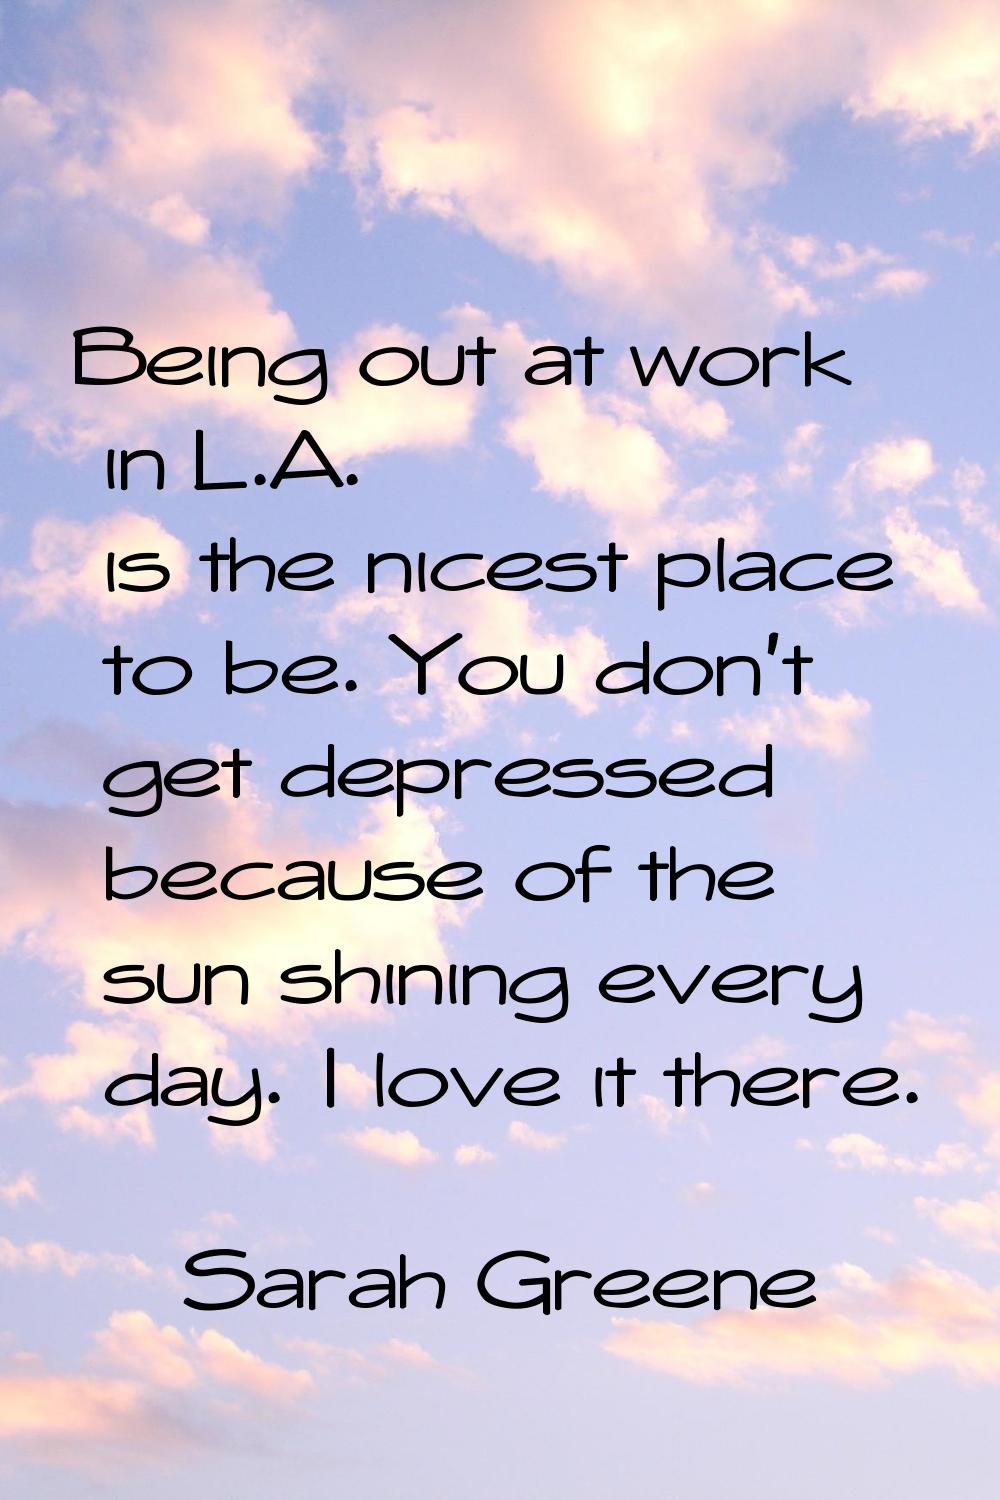 Being out at work in L.A. is the nicest place to be. You don't get depressed because of the sun shi